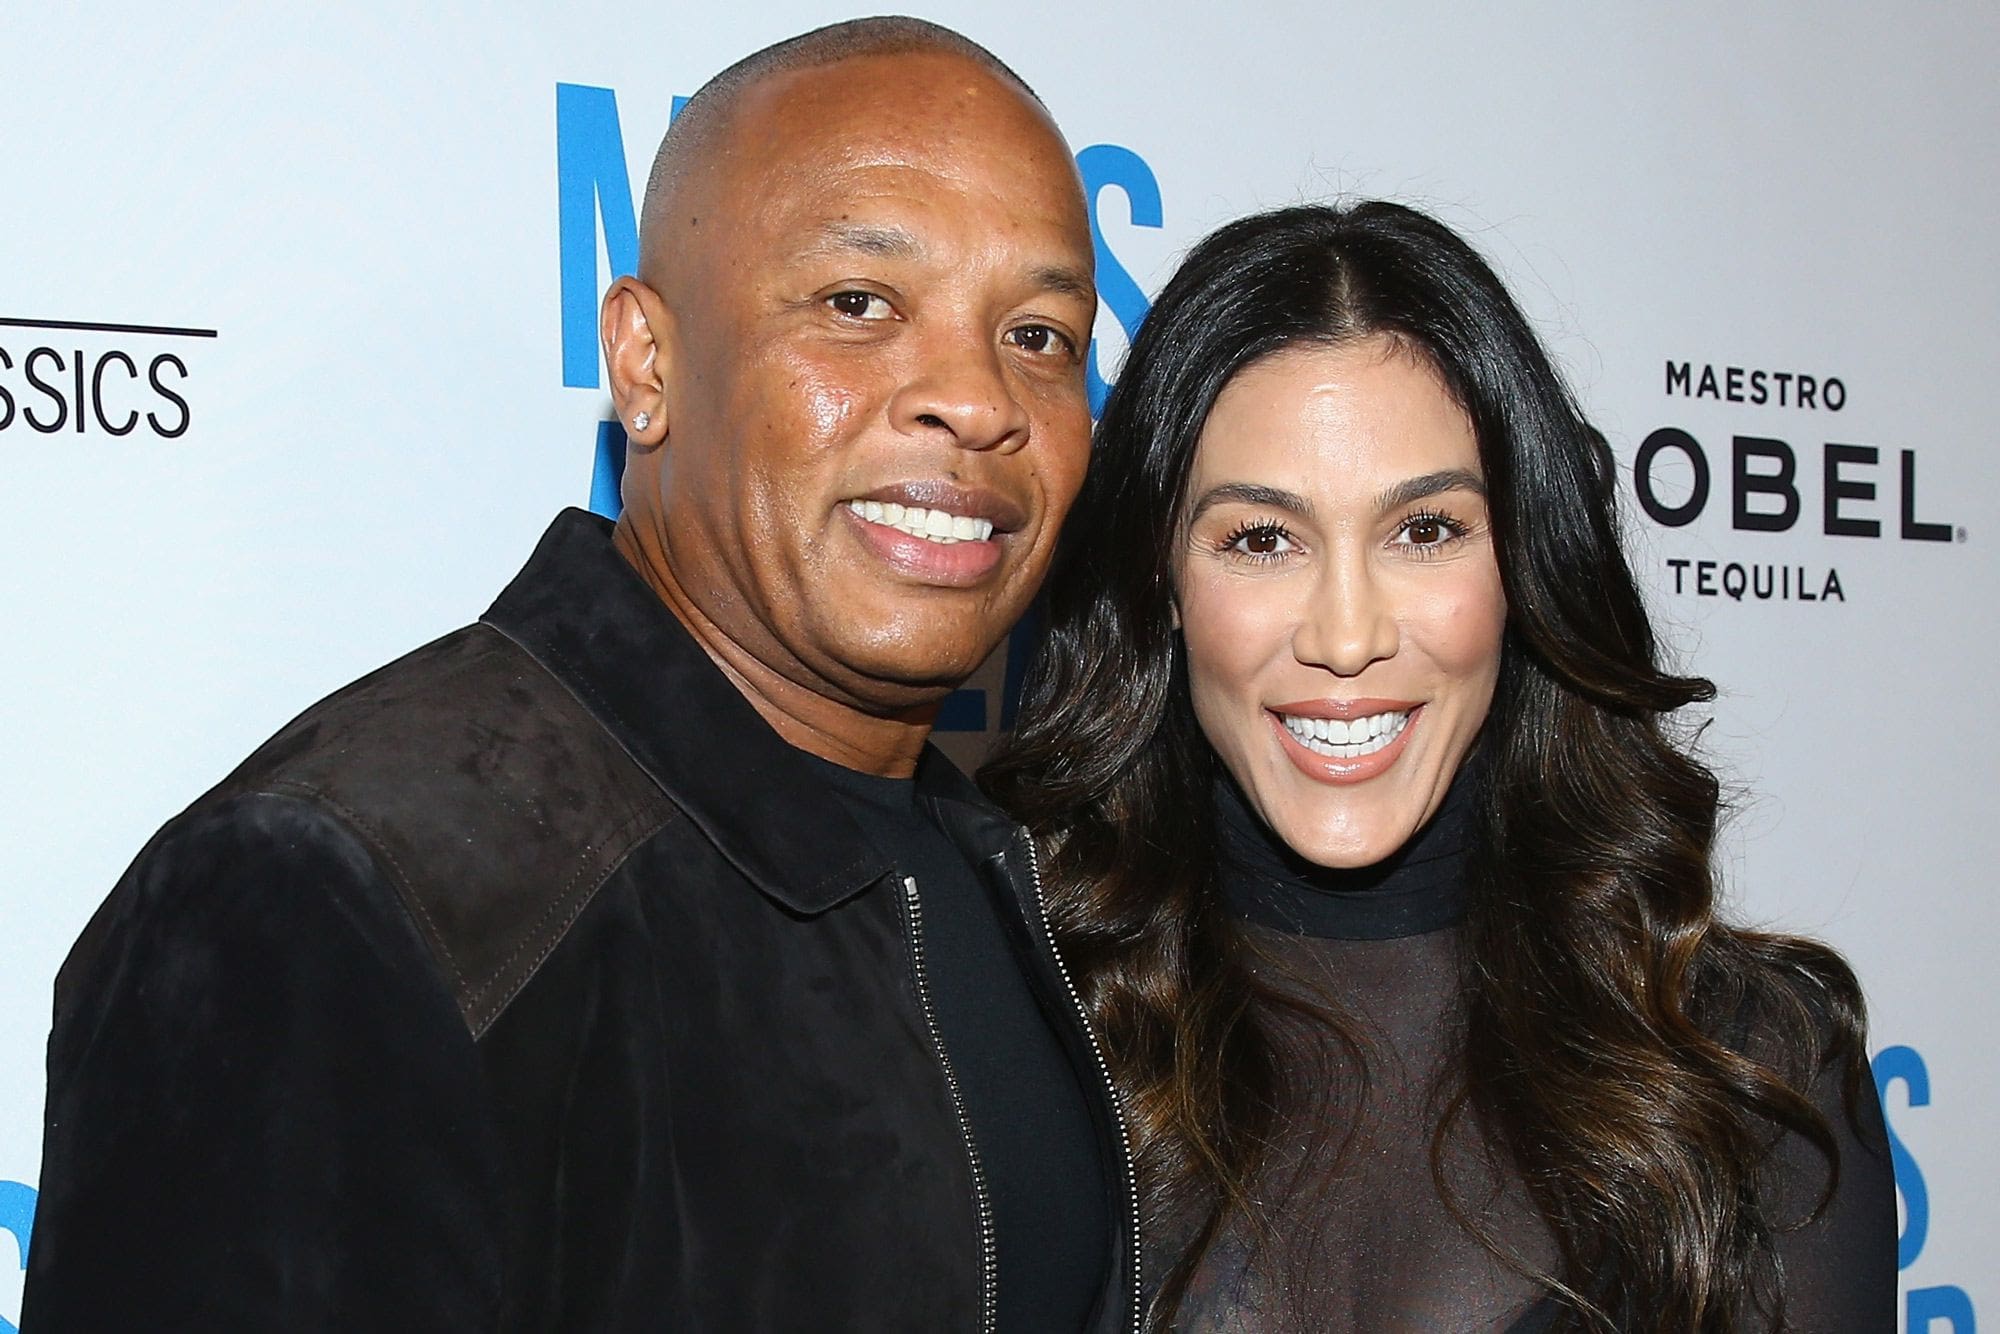 Dr. Dre's Estranged Wife Wants Almost $2 Million A Month From Him - Here Are The Details